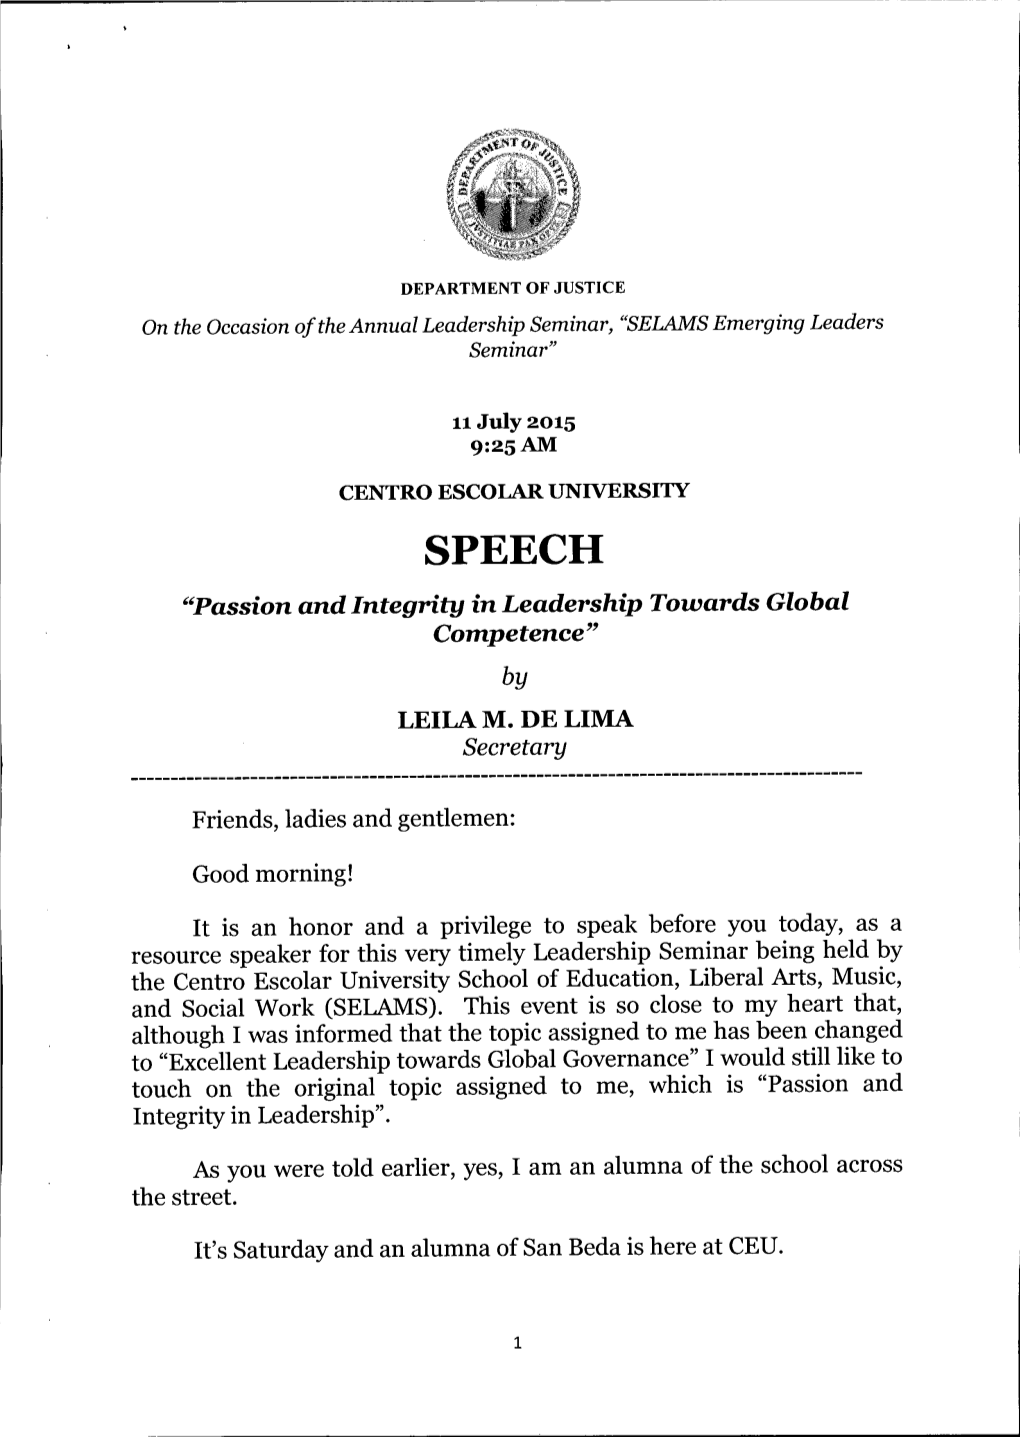 Passion and Integrity in Leadership Towards Global Competence" by LEILA M